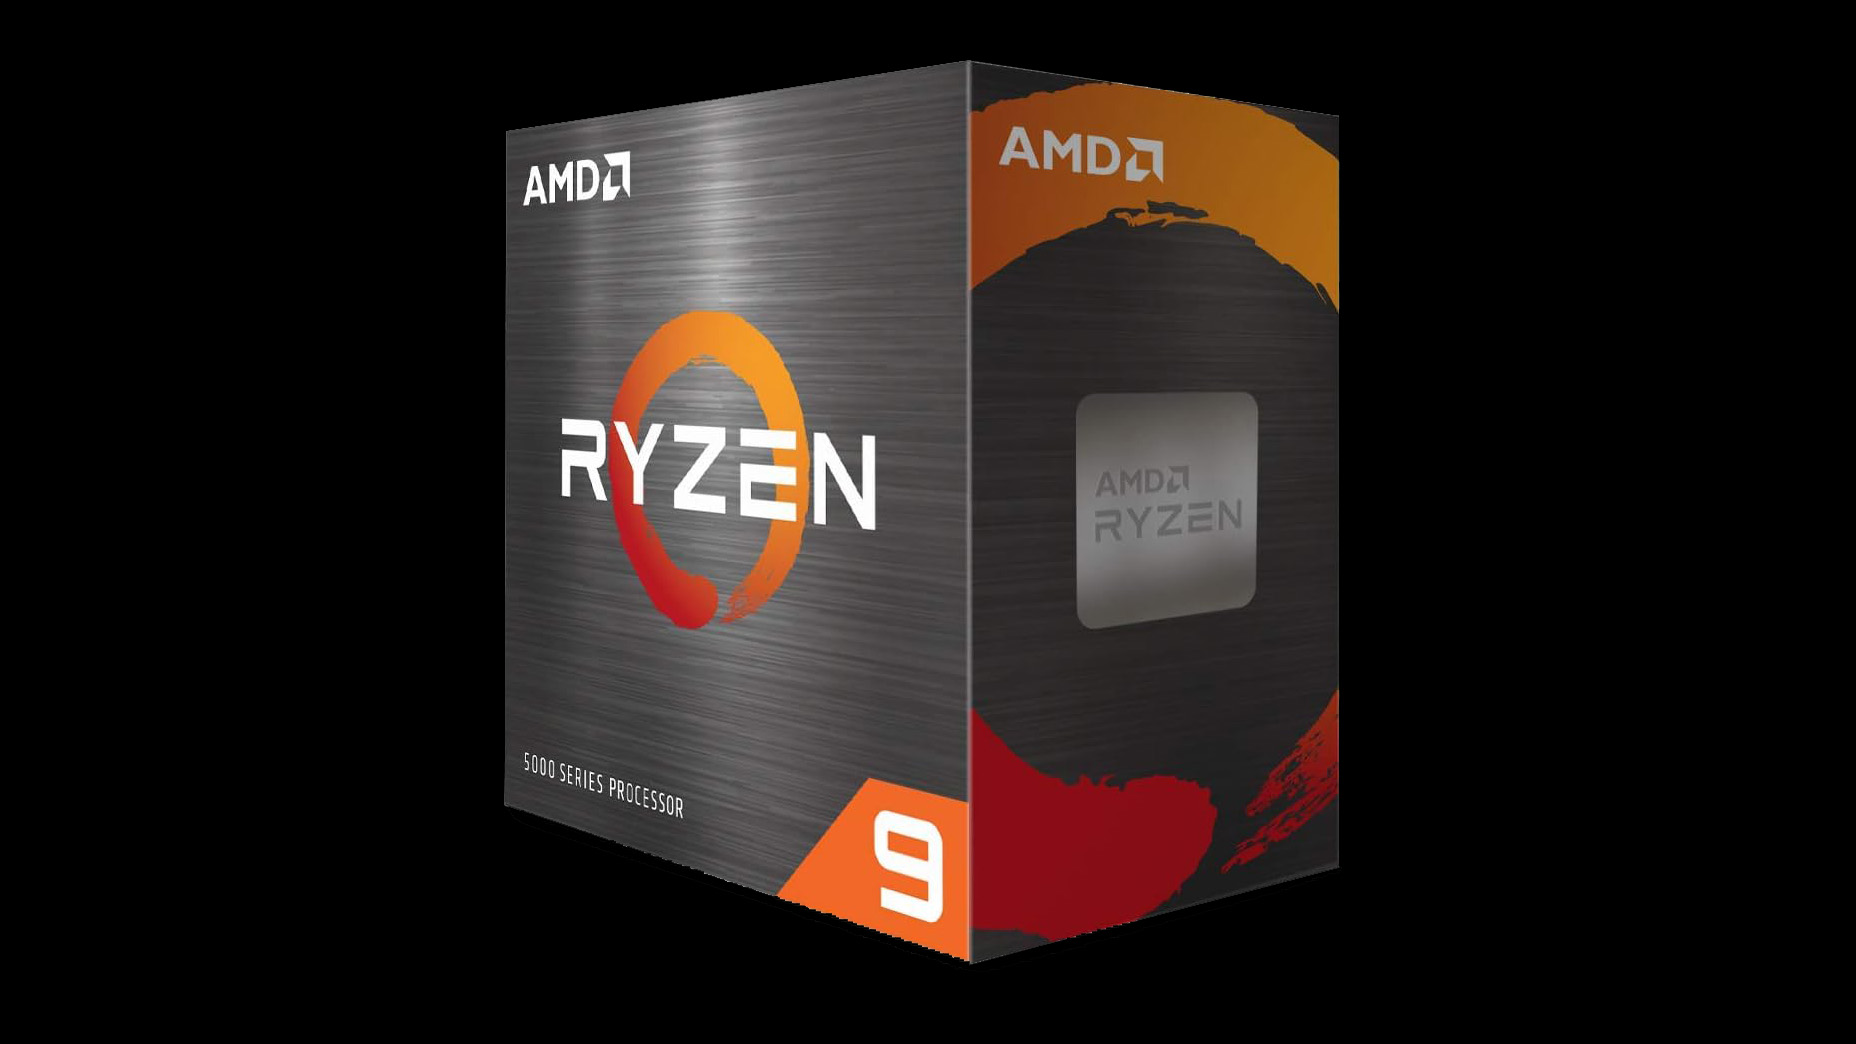 AMD's Ryzen 9 5900X is 50% off for Cyber Monday, delivering an excellent  upgrade for socket AM4 users